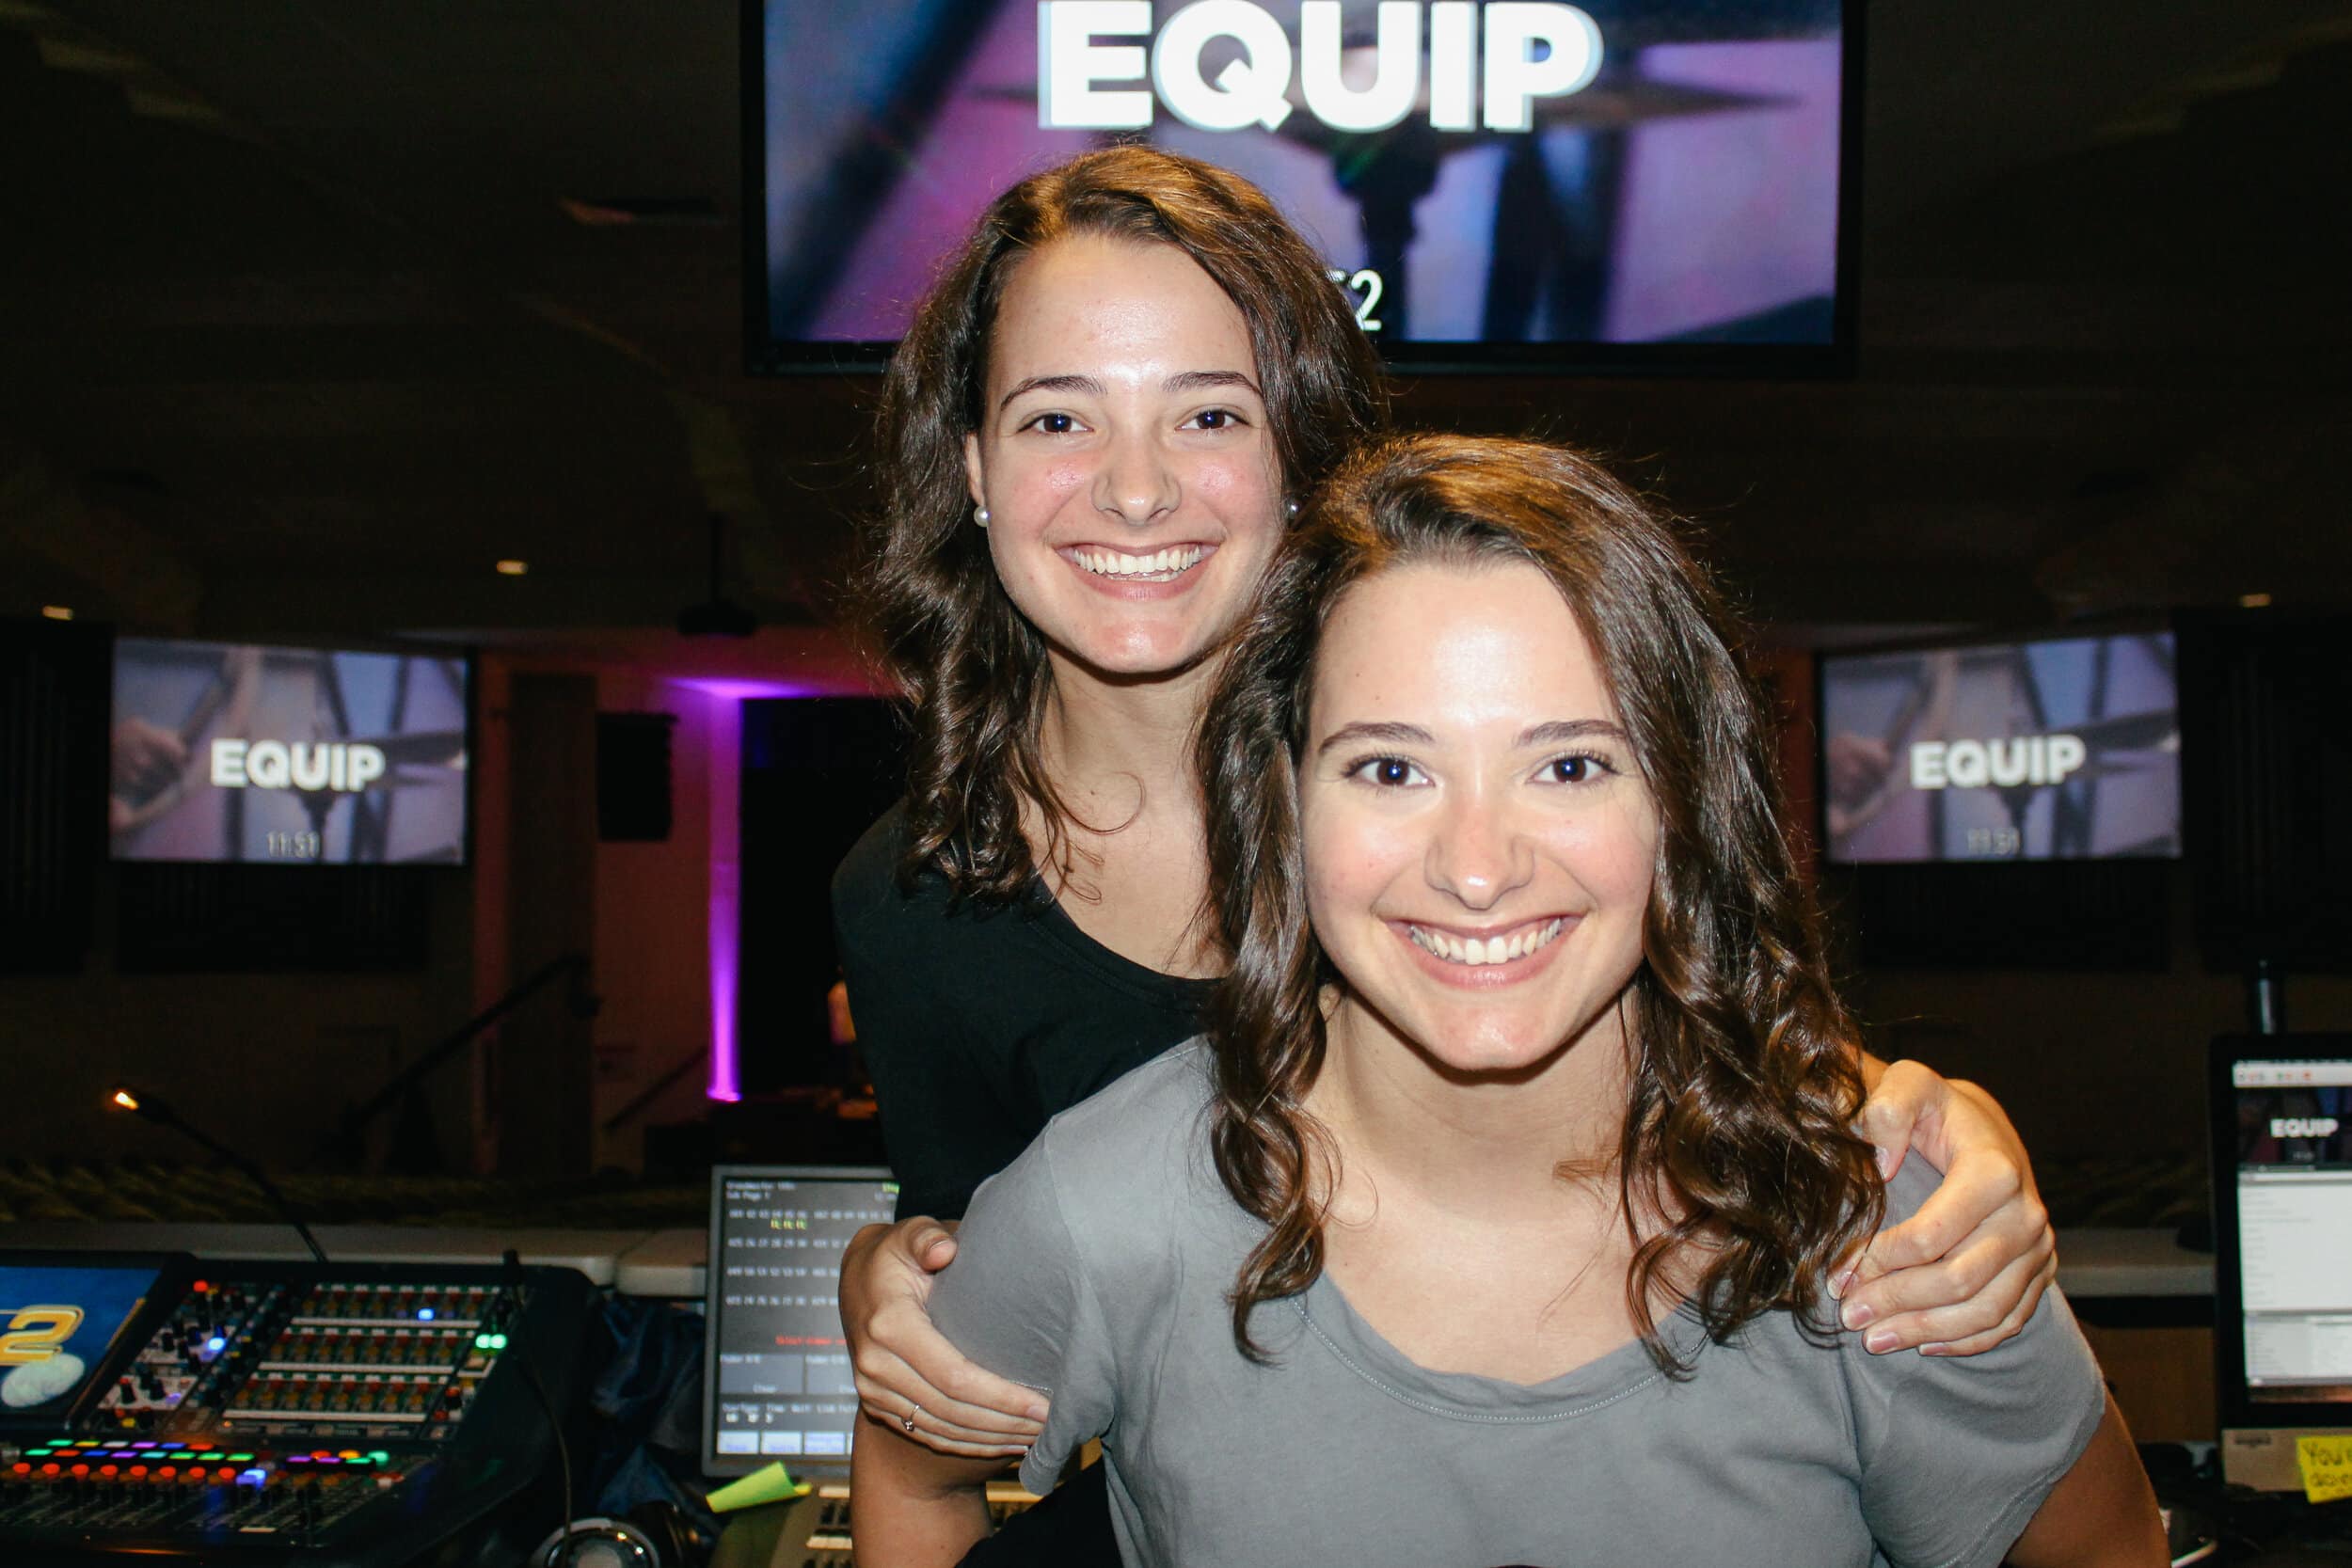 Senior broadcast media major Rachel Daniel and senior digital media major Nicole Daniel smile as they are preparing to work with Media Team for BCM.